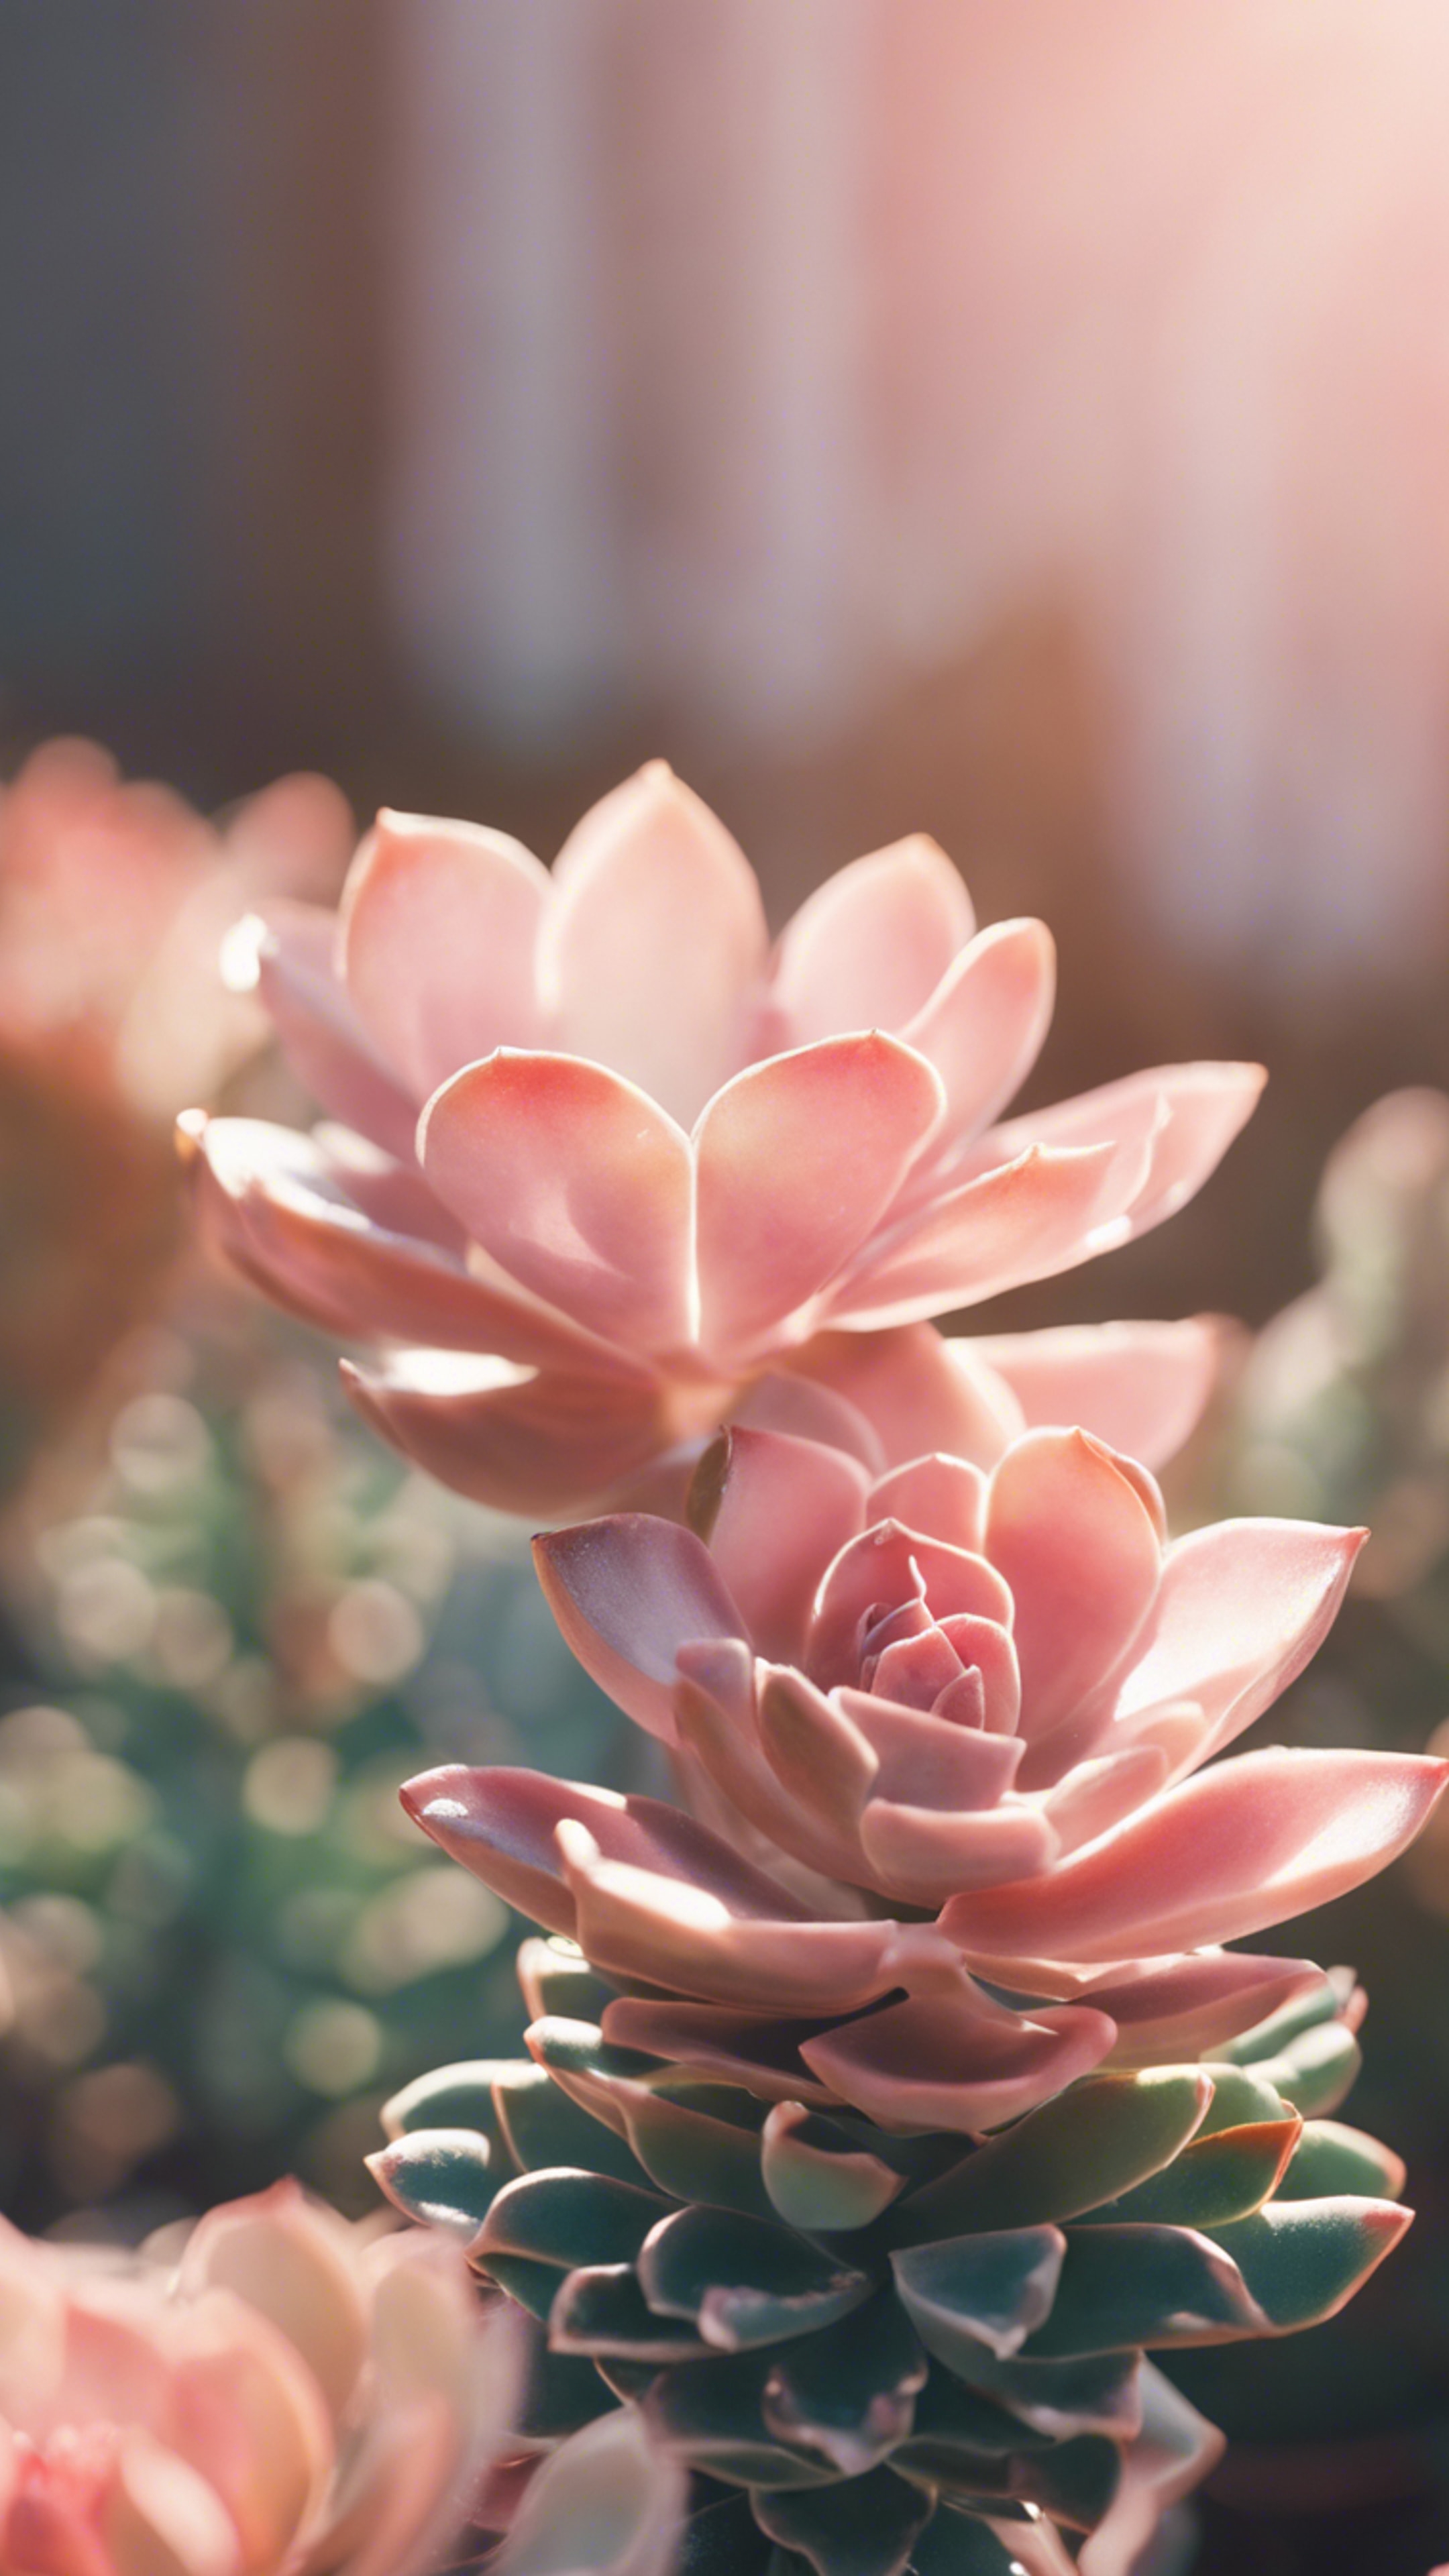 A close-up view of a preppy pastel pink succulent plant bathed in gentle morning sunshine. Шпалери[96679d4148894c129b05]